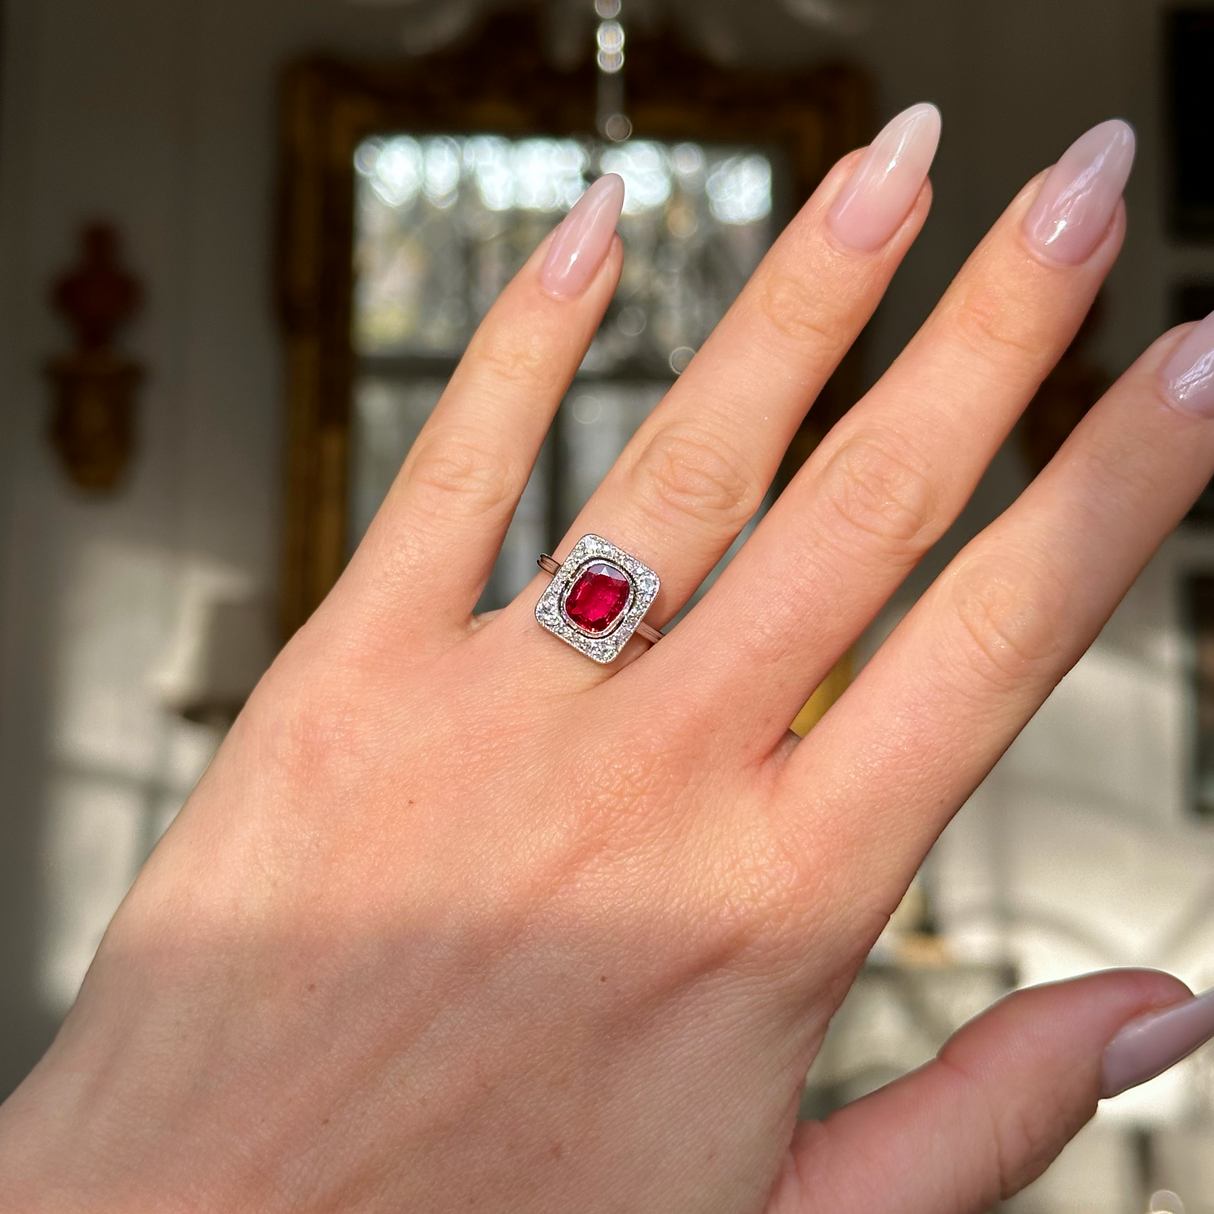 Vintage Art Deco ruby and diamond engagement ring worn on hand.